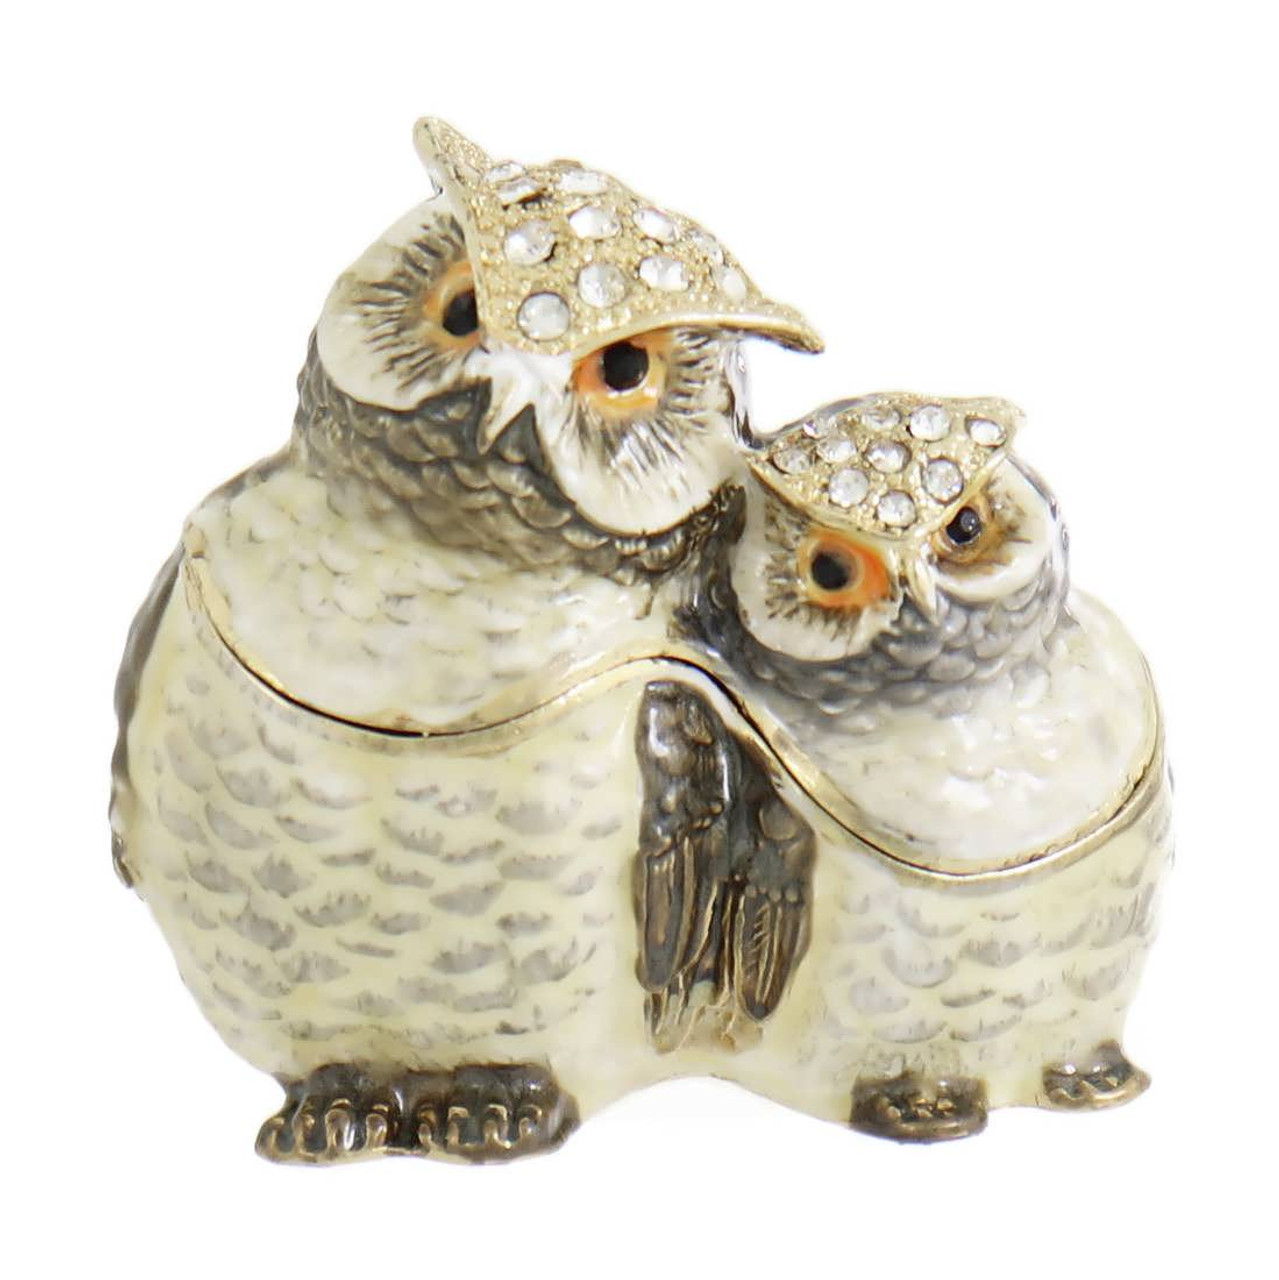 Jewelry Trinket Box Ring Holder Owl Figurine Collectible Hand-Painted Lady Gifts